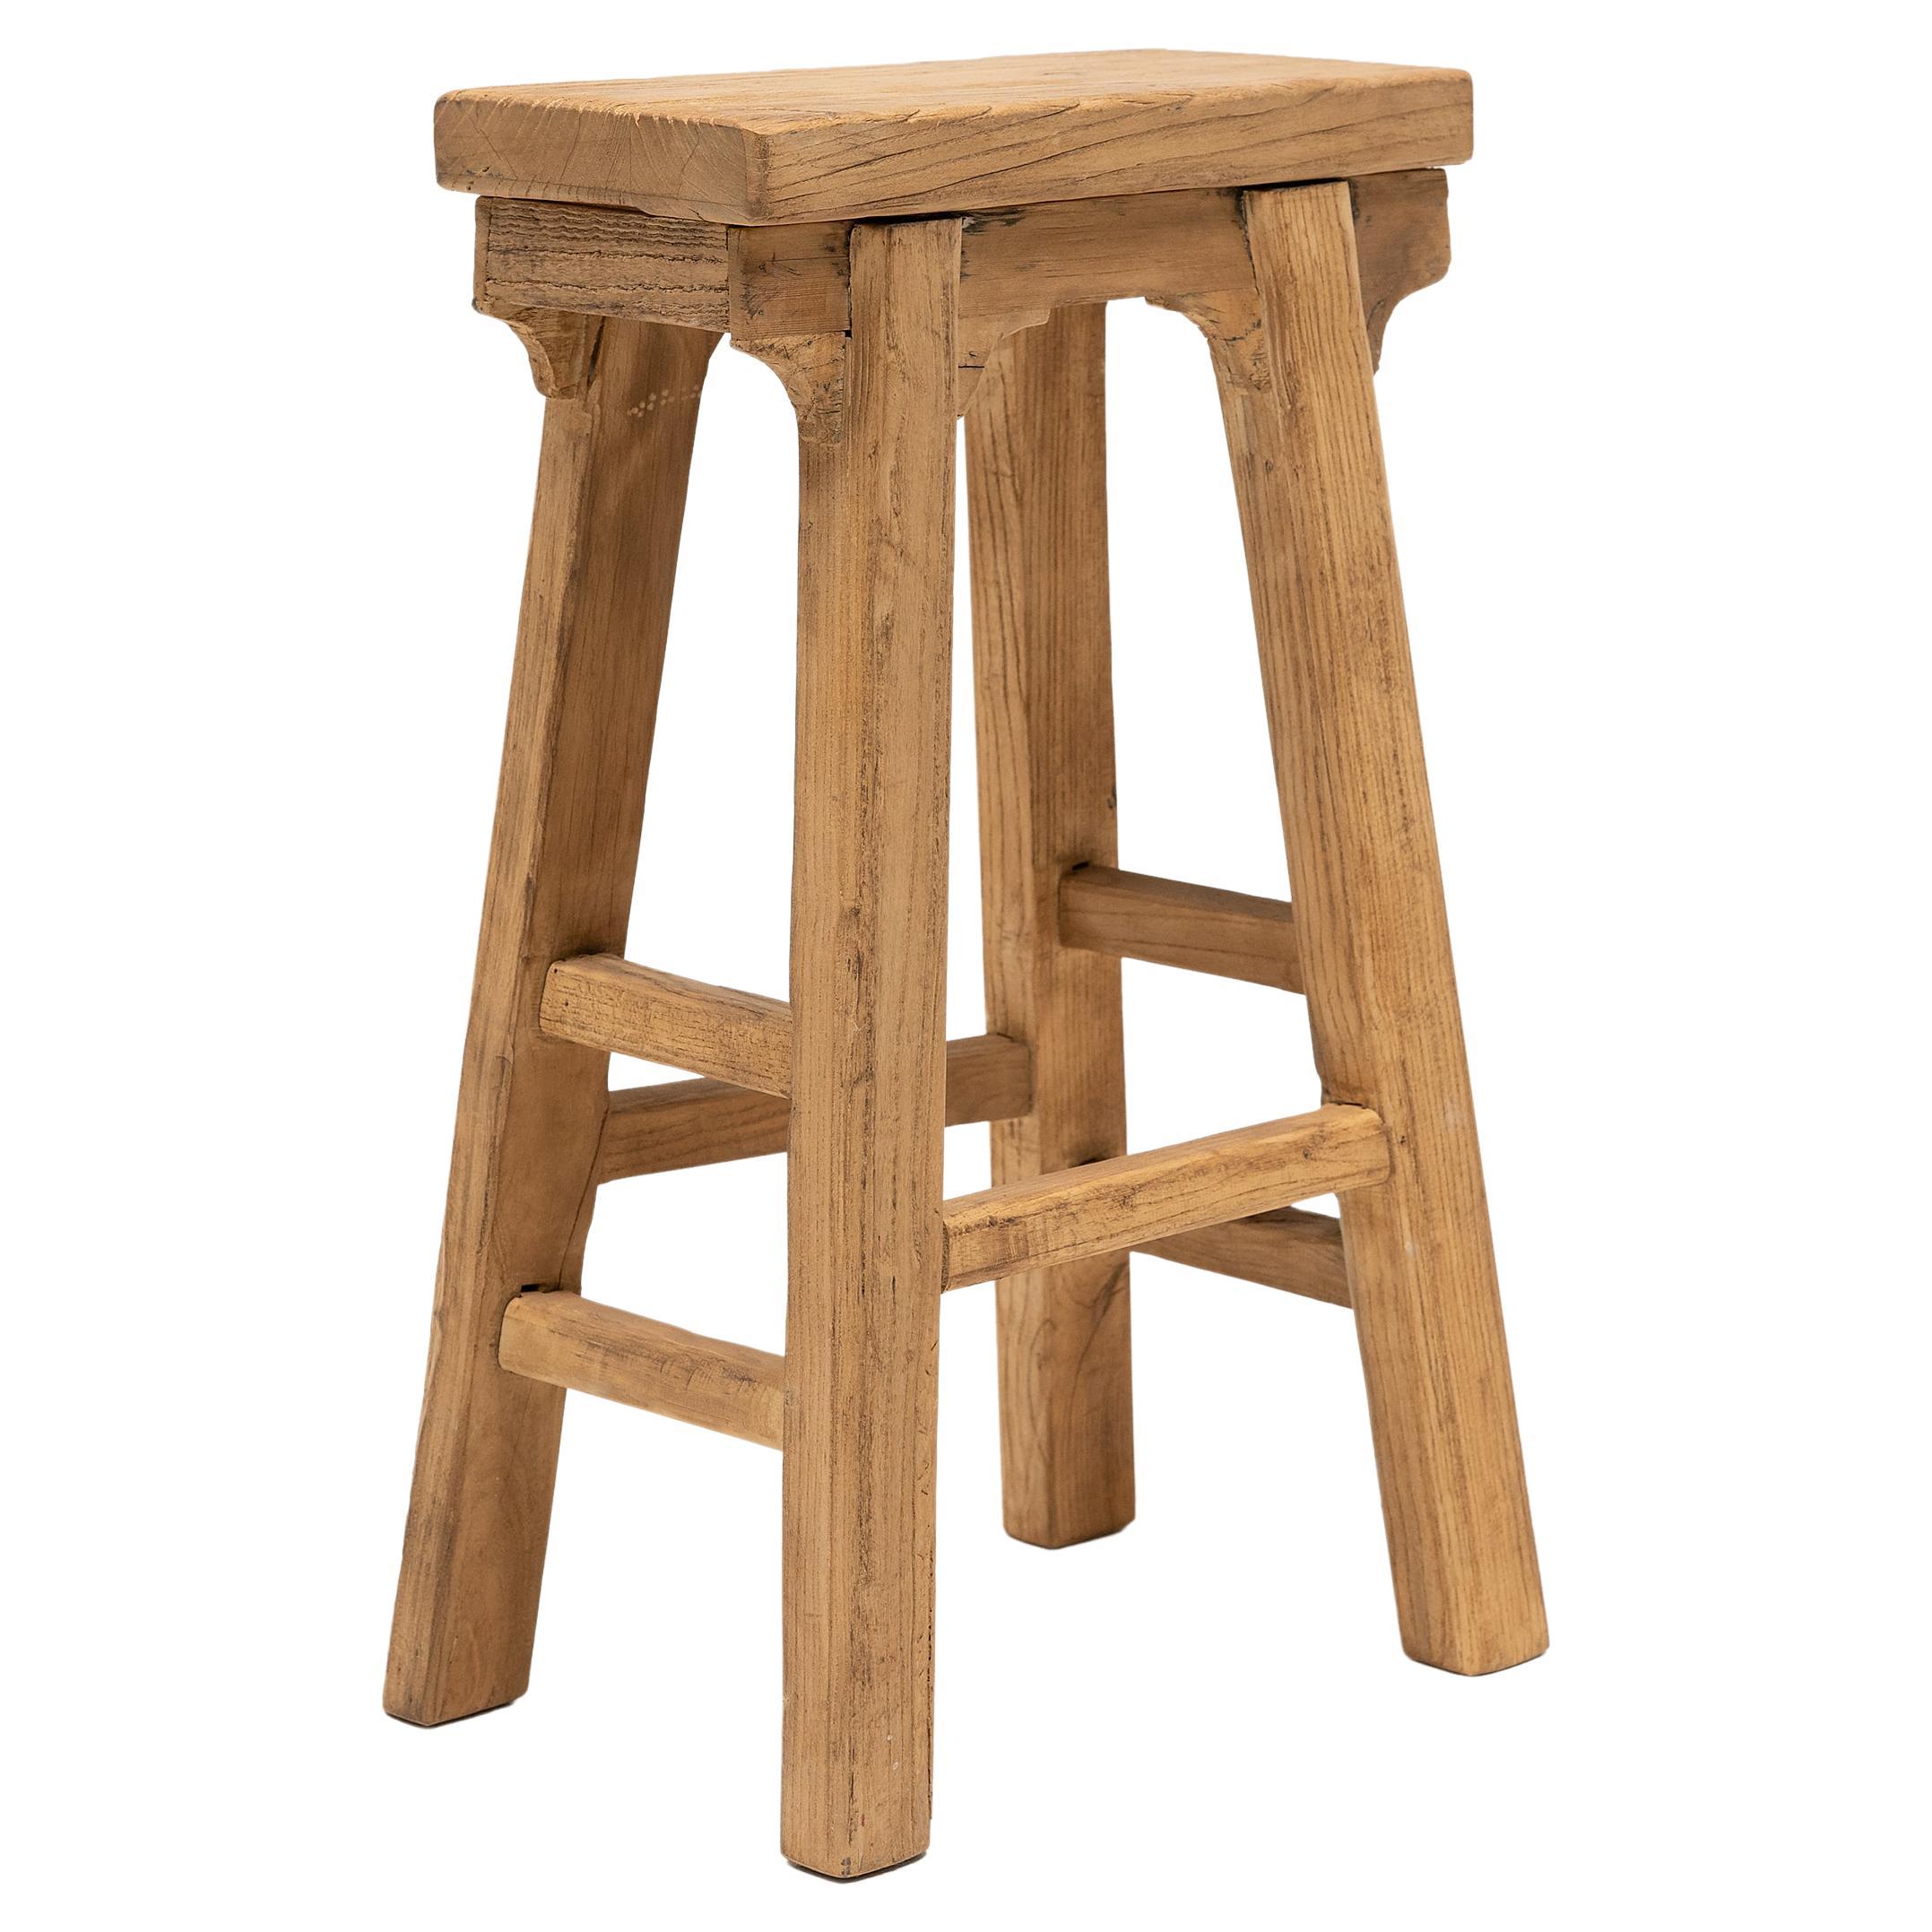 Tall Provincial Chinese Stool For Sale